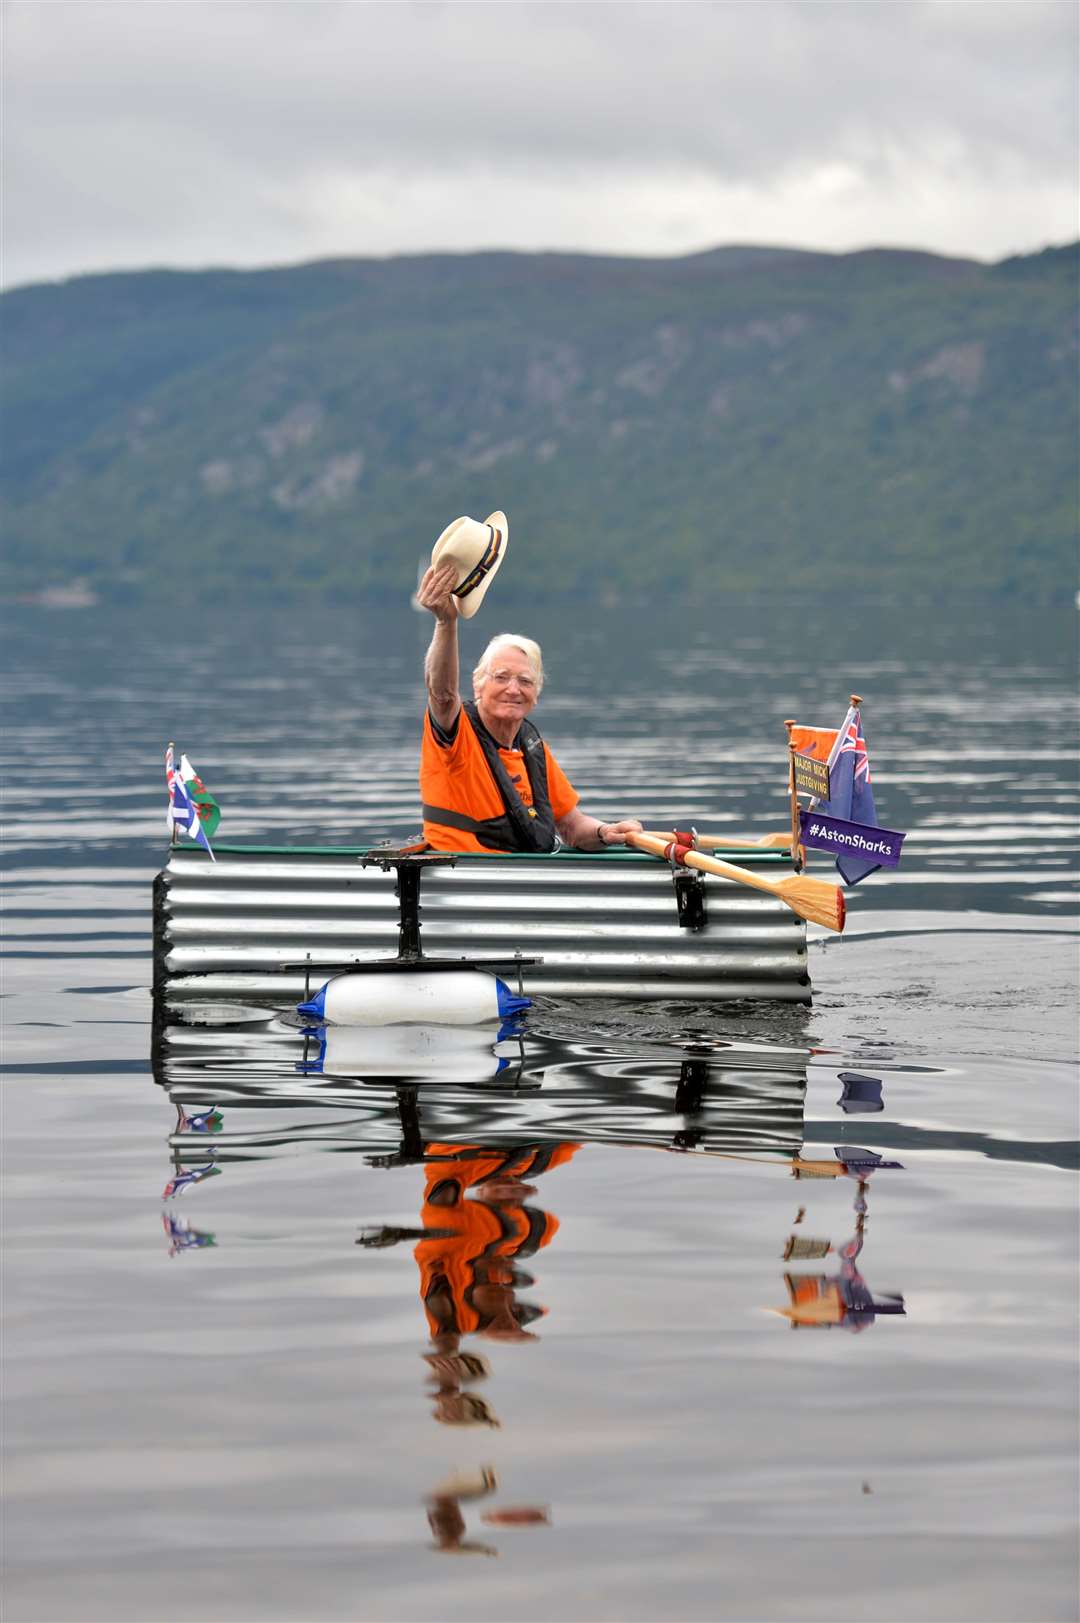 Major Mick took a rowing trip on Loch Ness during his UK-wide journey.